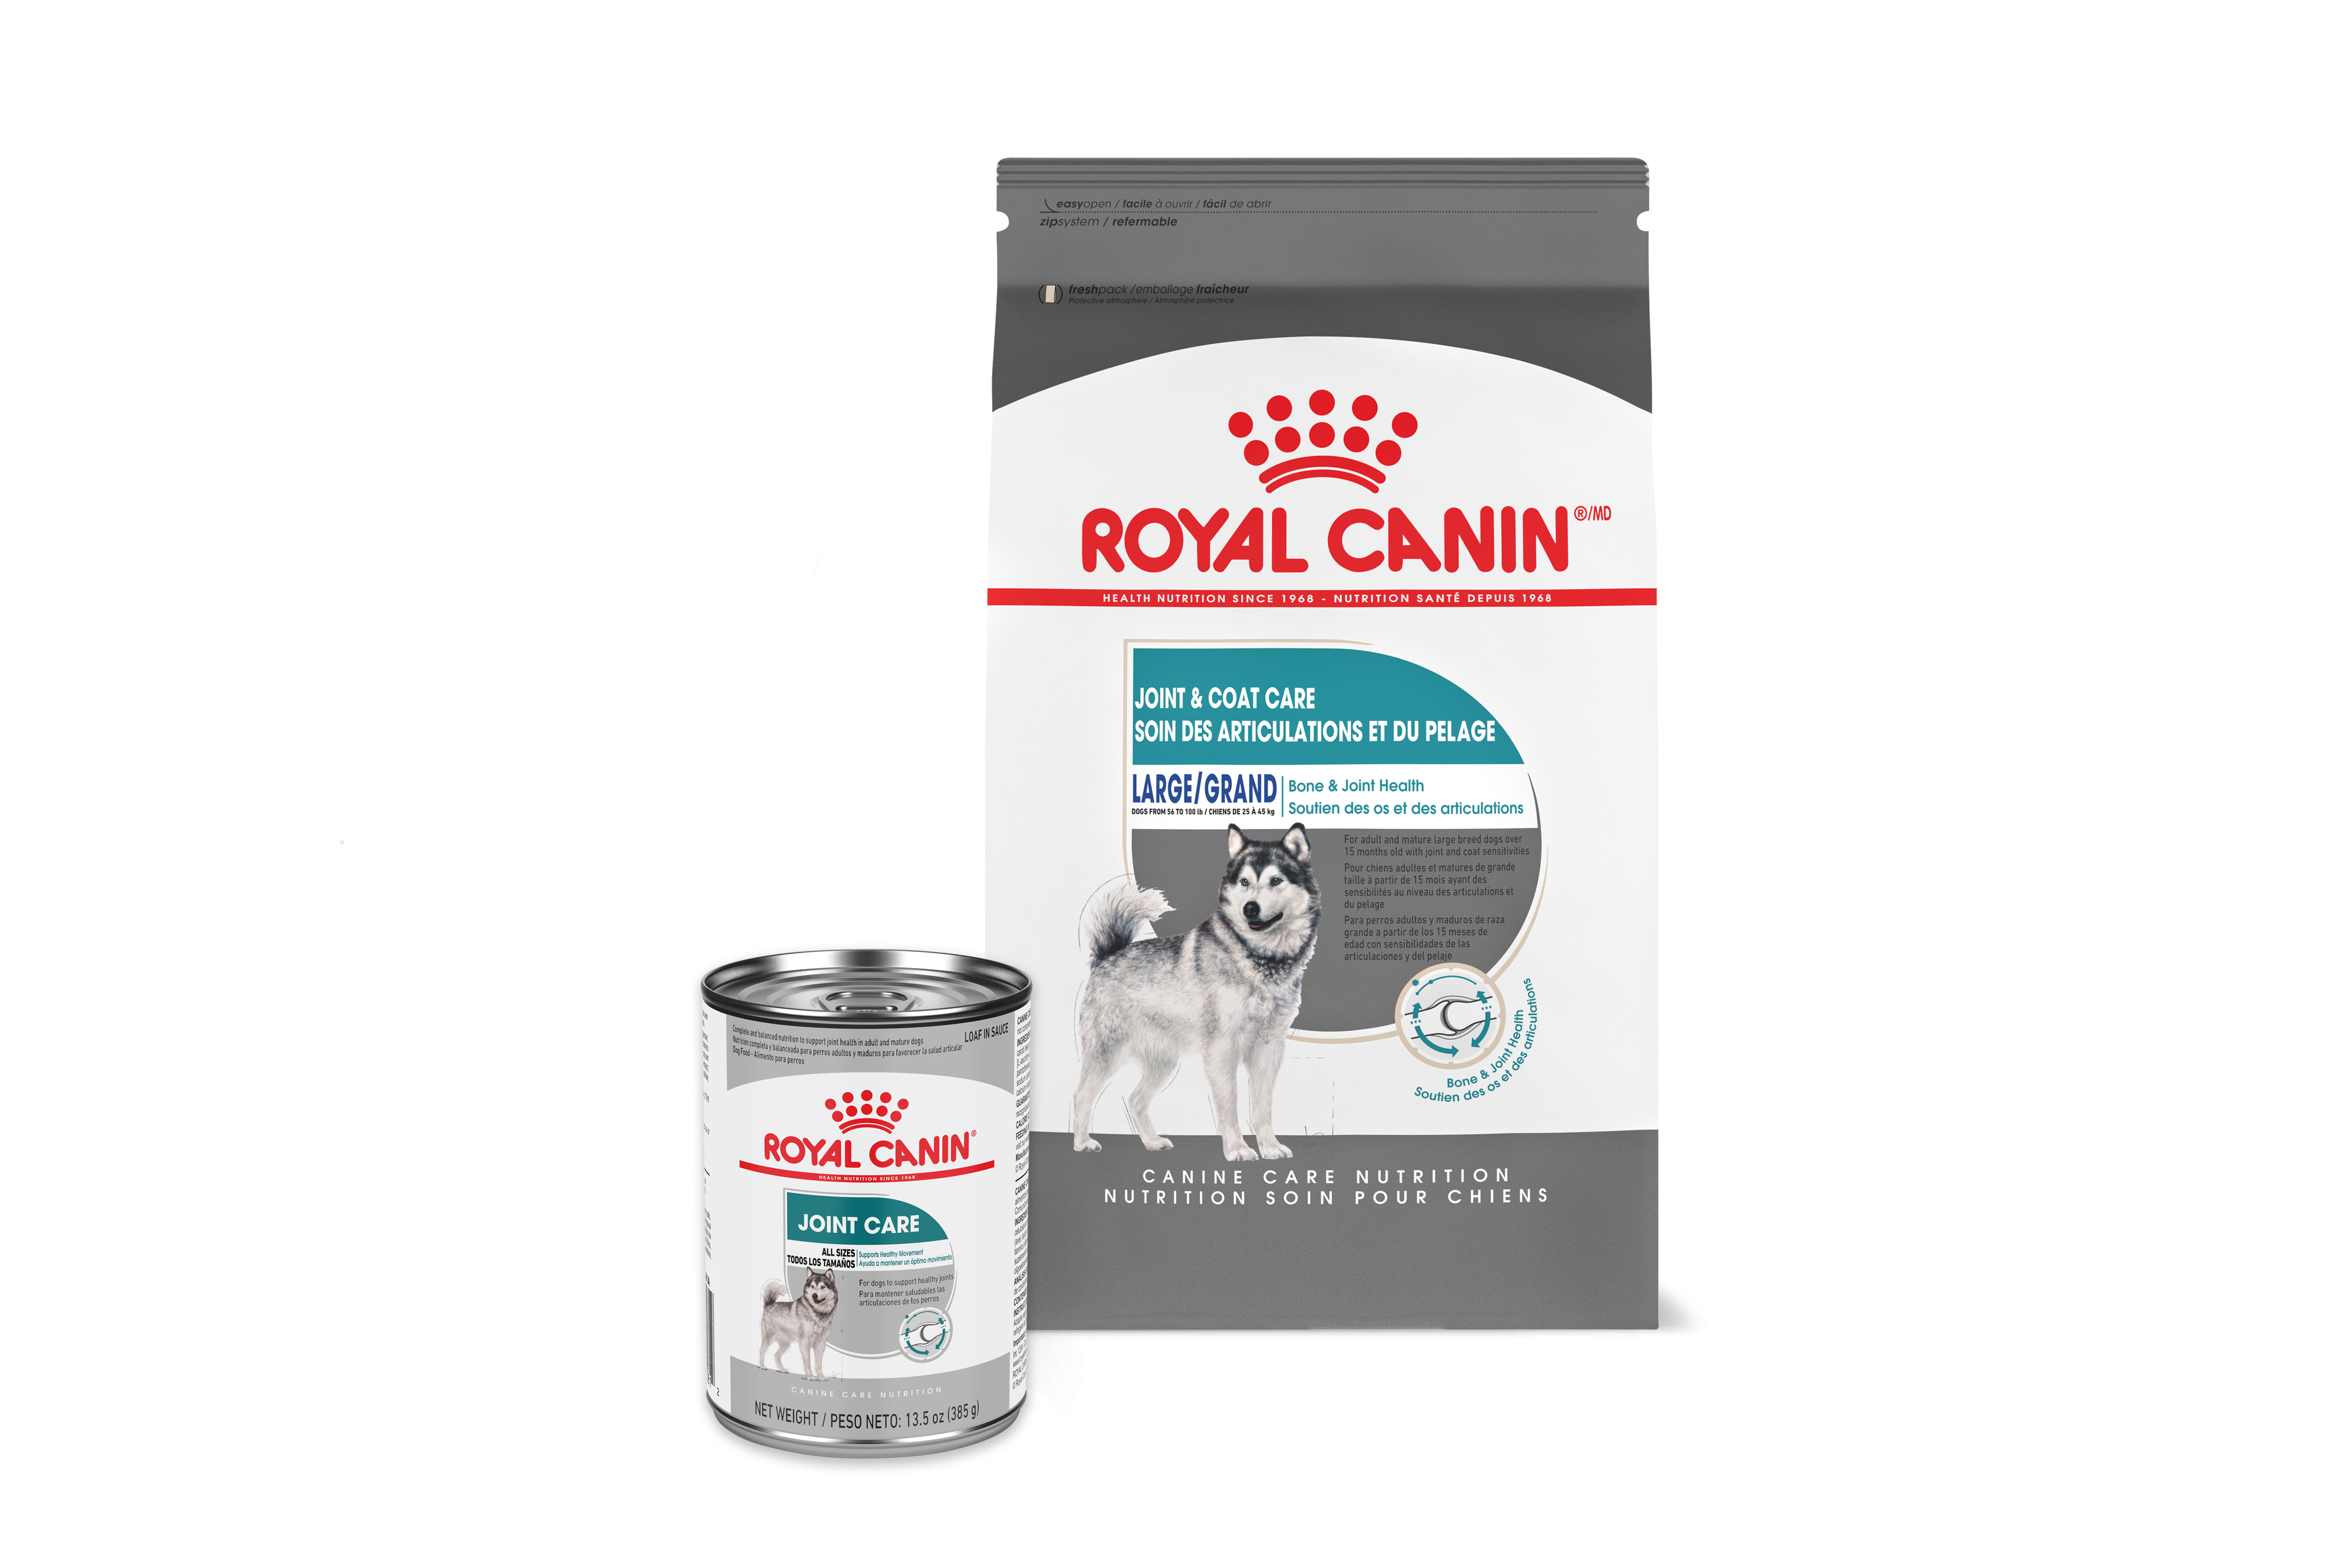 Royal Canin Joint Care Range of Products